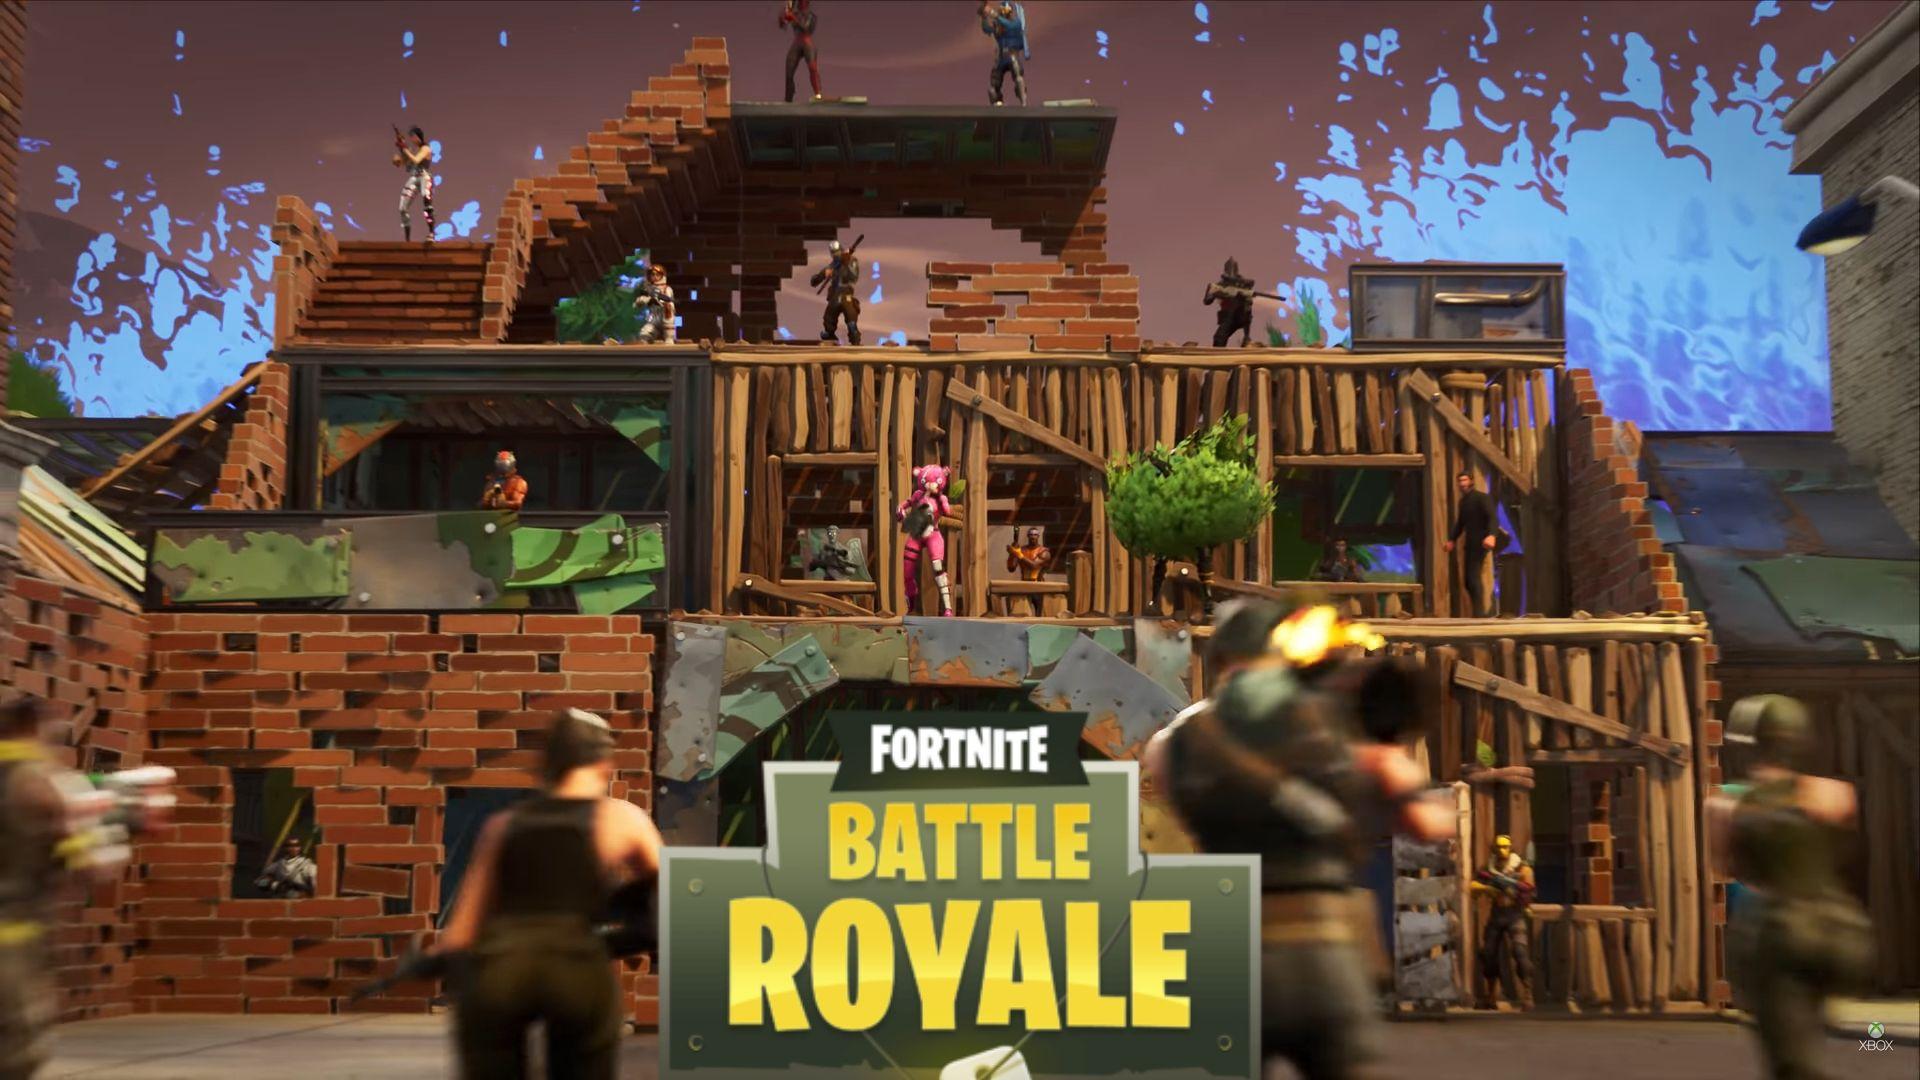 Fortnite Battle Royale Introduces Teams Of 20 In New Limited Time